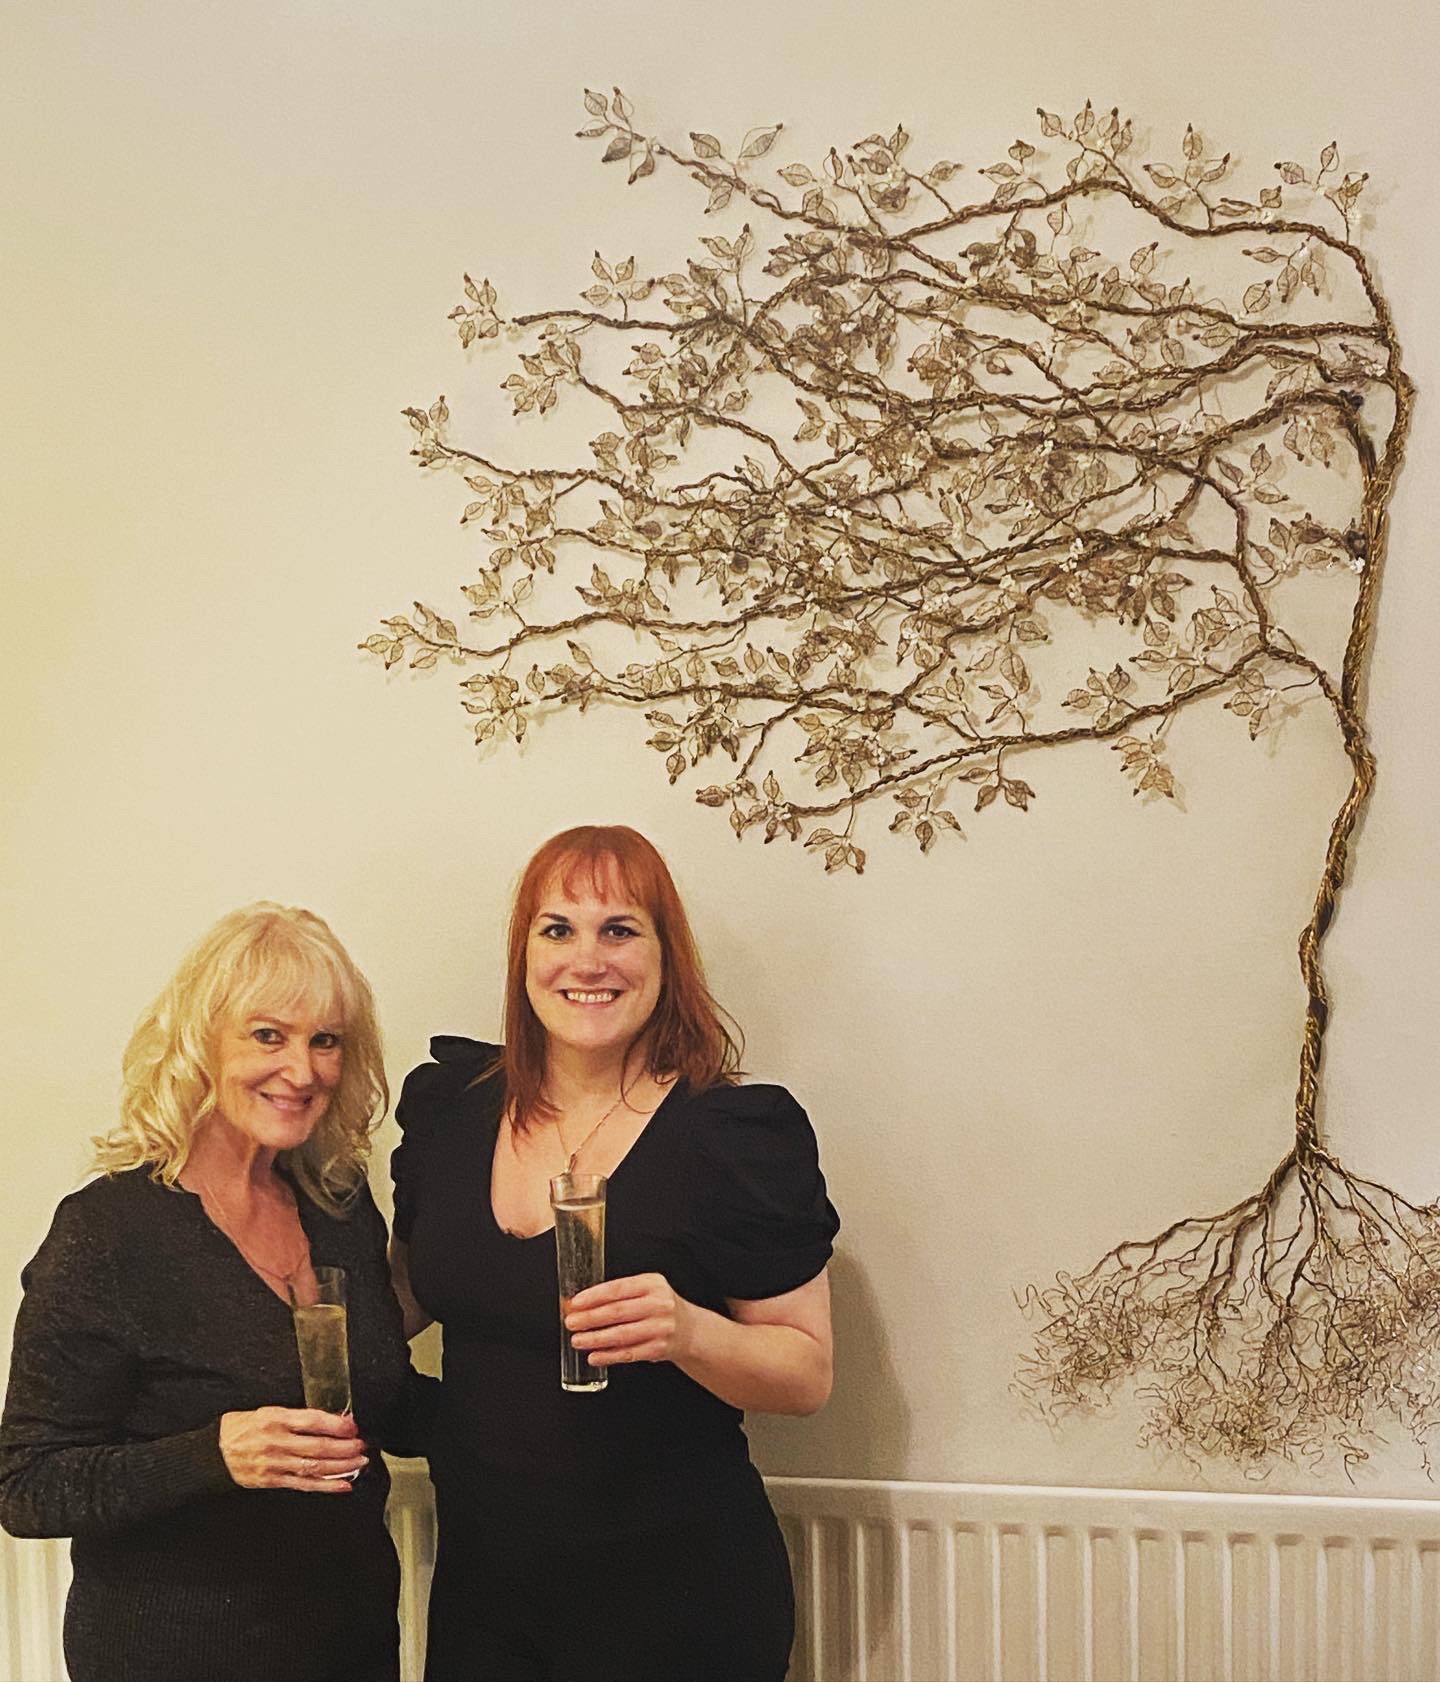 Artist Rachel AKers with her piece 22blossom in the wind22 wire tree sculpture jpg